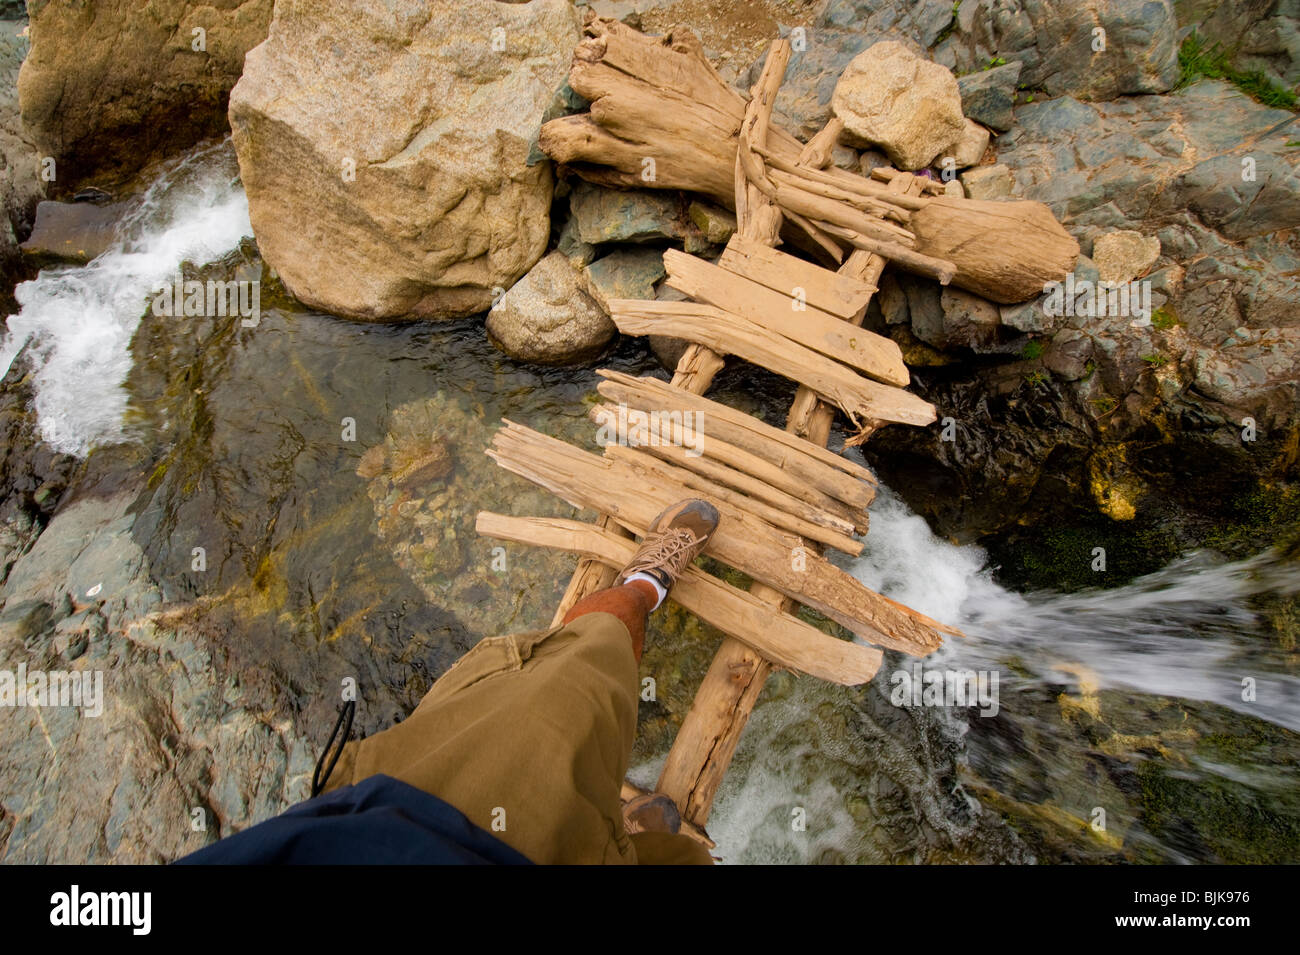 This is an image of a man walking across a wooden bridge over a raging river. Stock Photo